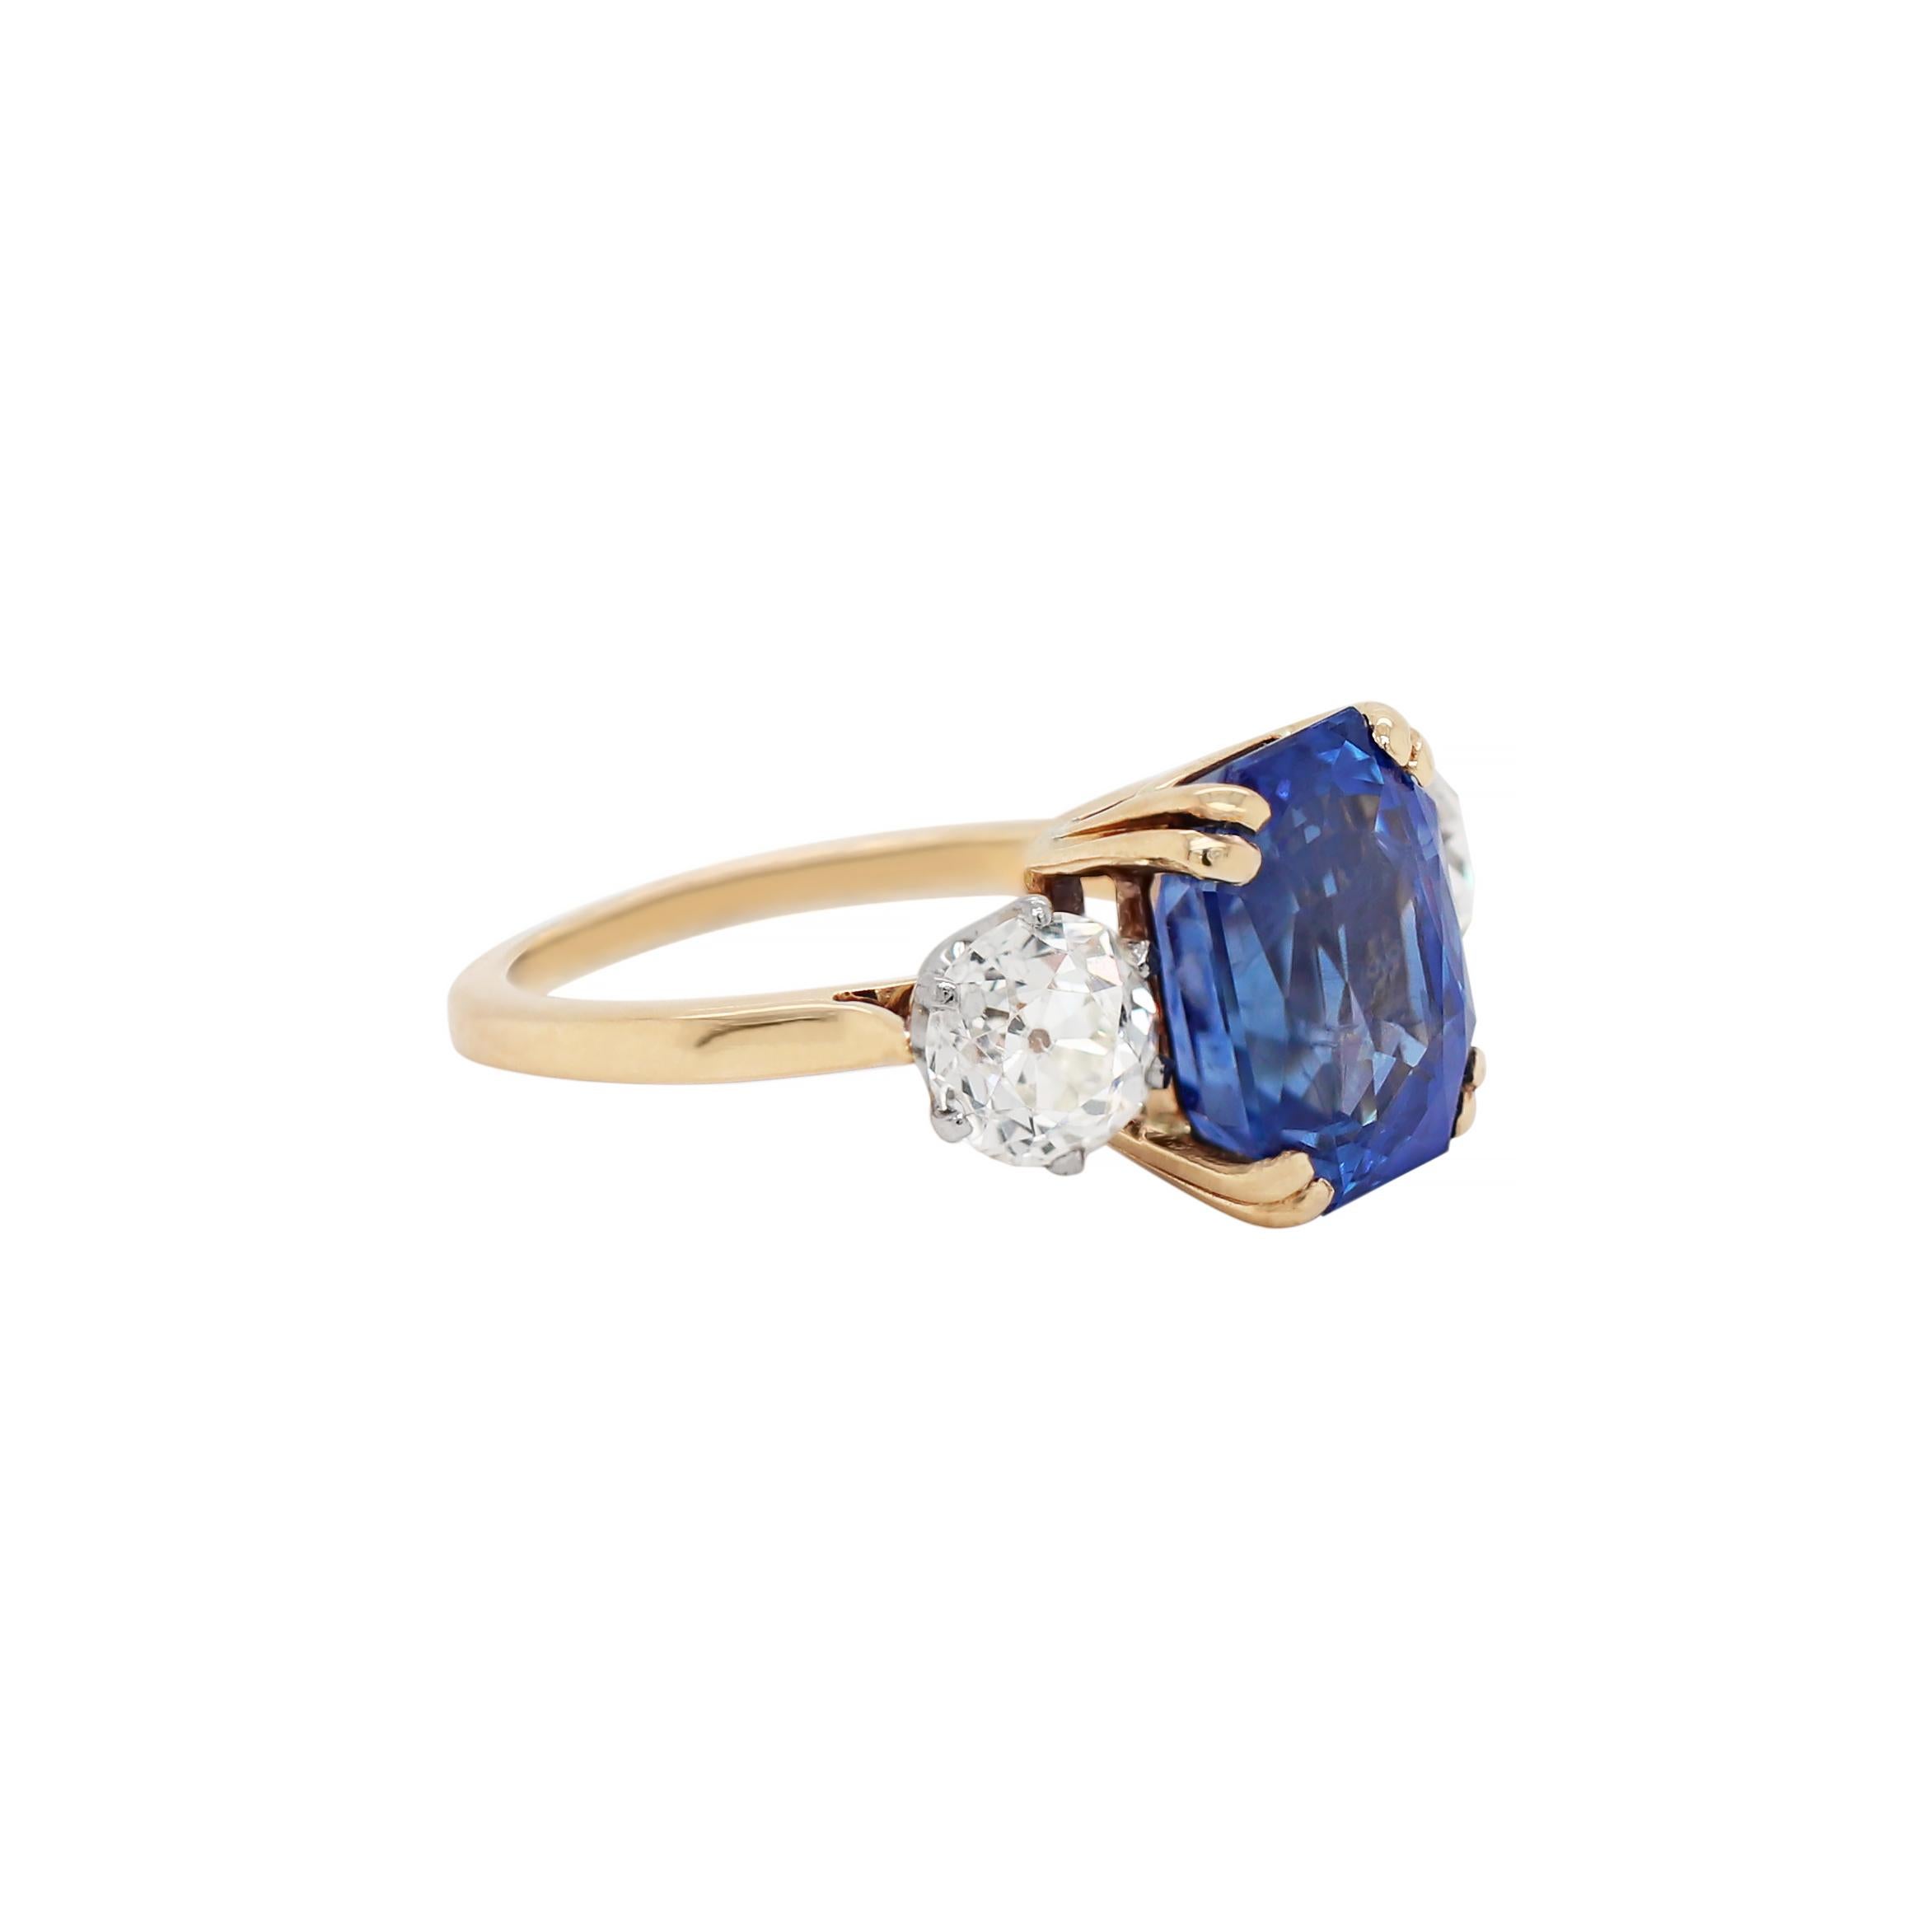 Beautiful handmade engagement ring set with a natural unheated blue sapphire weighing a total of 7.29 carats mounted in a four double claw, open back setting, accompanied by two old mine cut diamonds, one on either side, weighing a total of 1.80